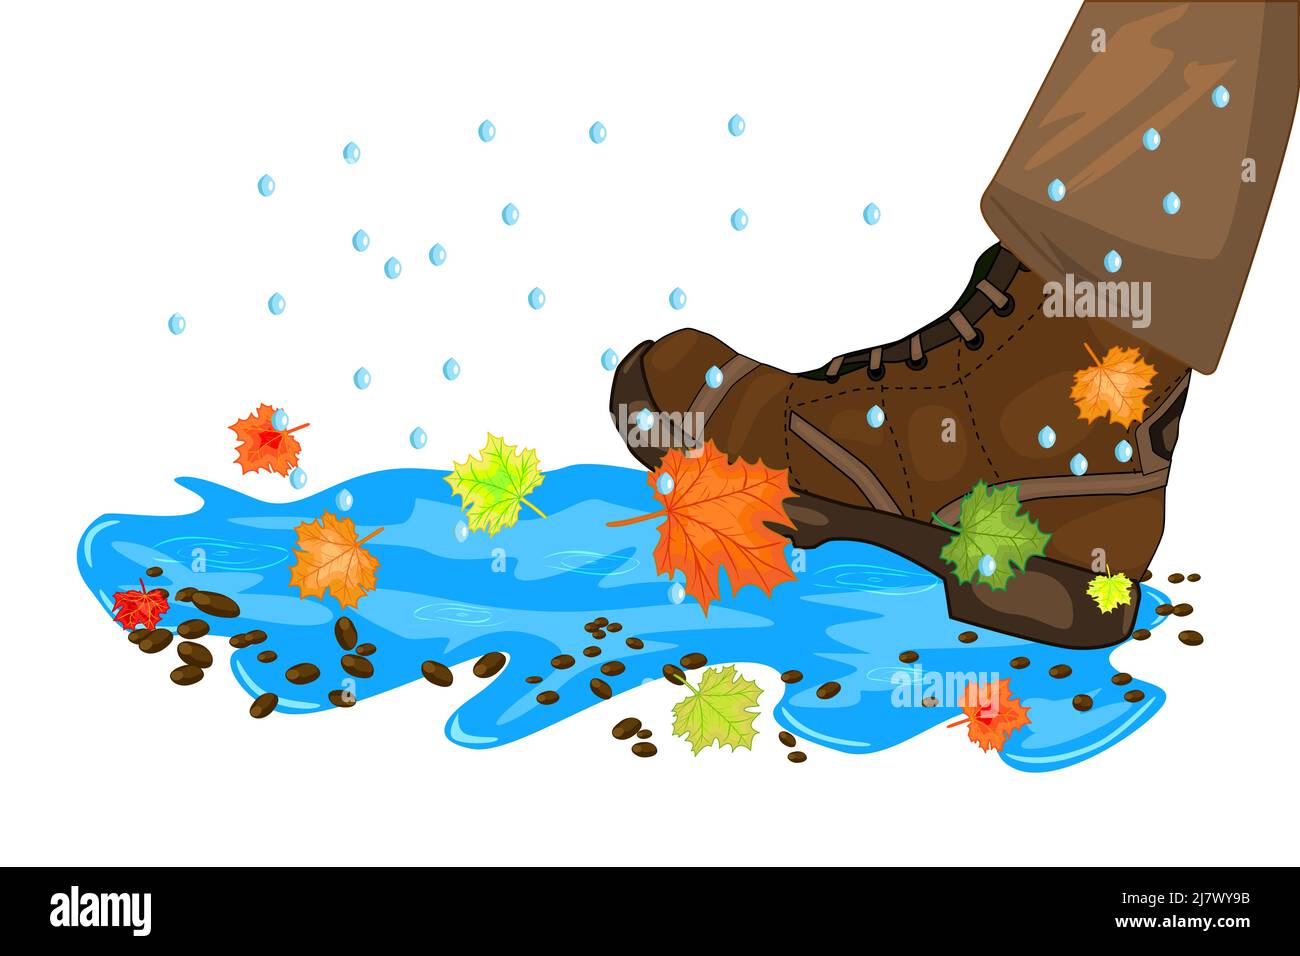 Leg with shoe, puddle, maple leaves and rain drops isolated on white background. Feet step in puddle. Leg in fall water. Autumn season concept. Vector Stock Vector